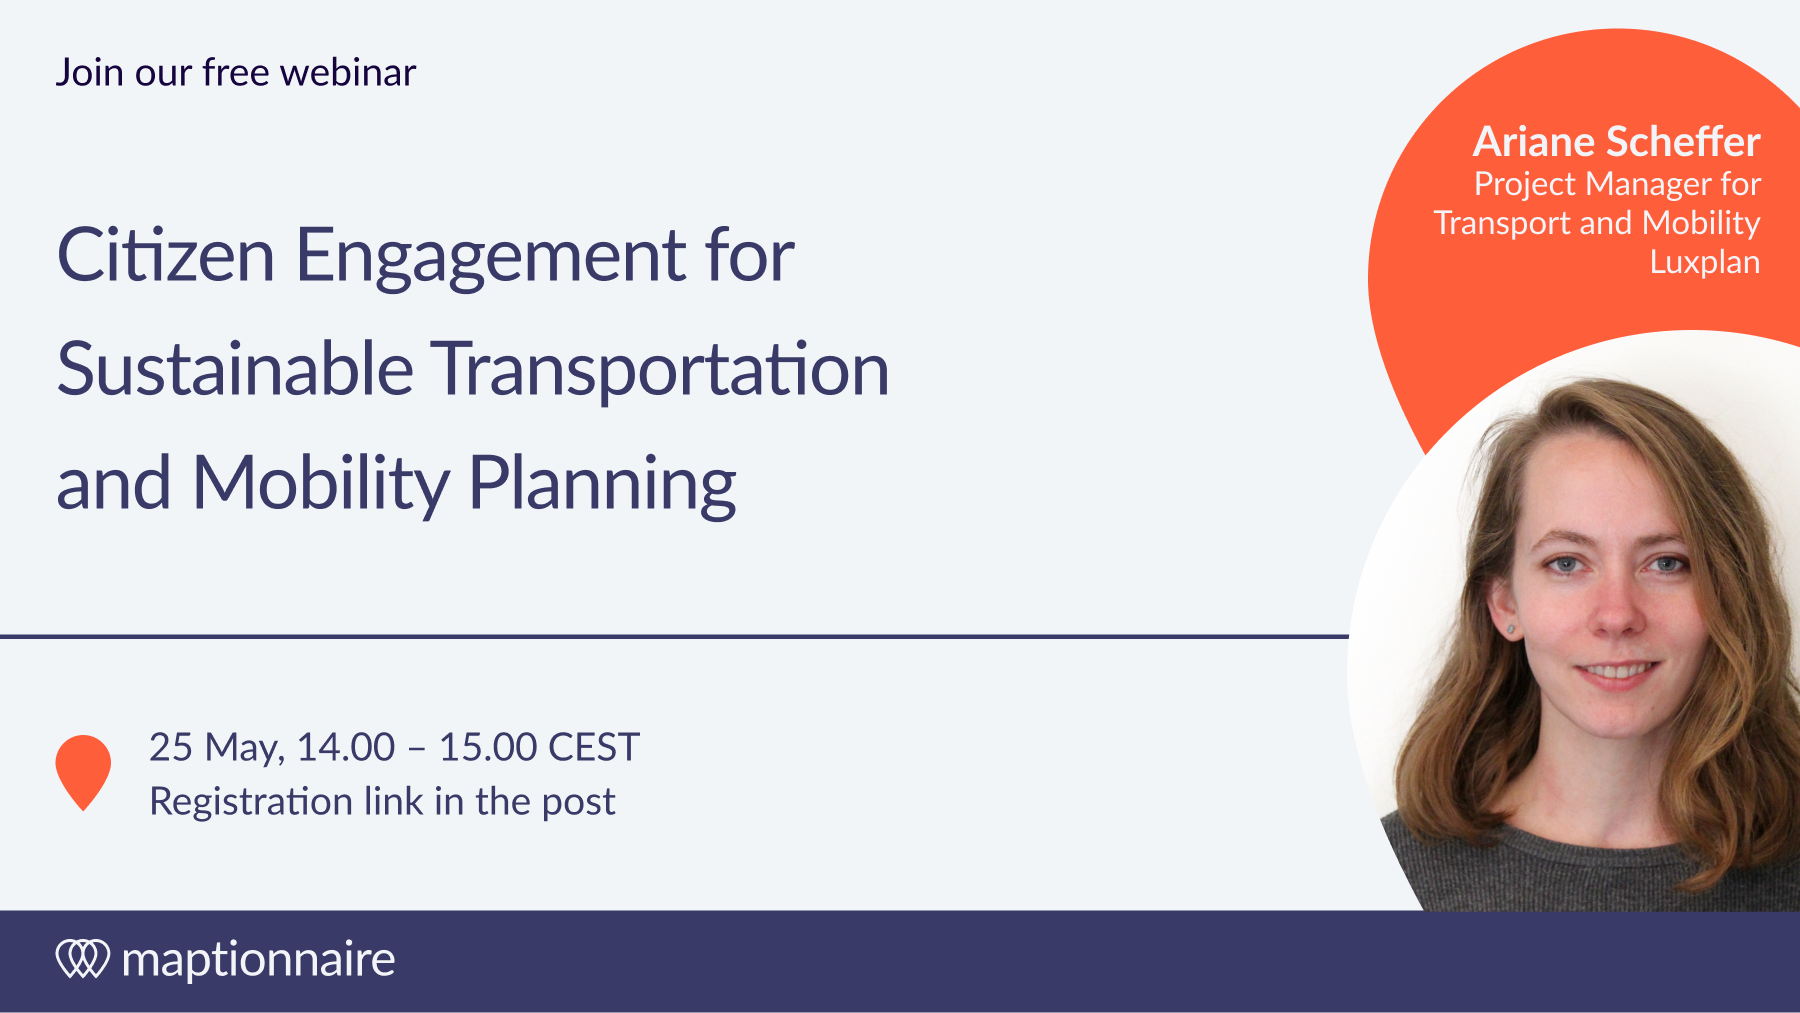 Citizen engagement for sustainable transportation and mobility planning